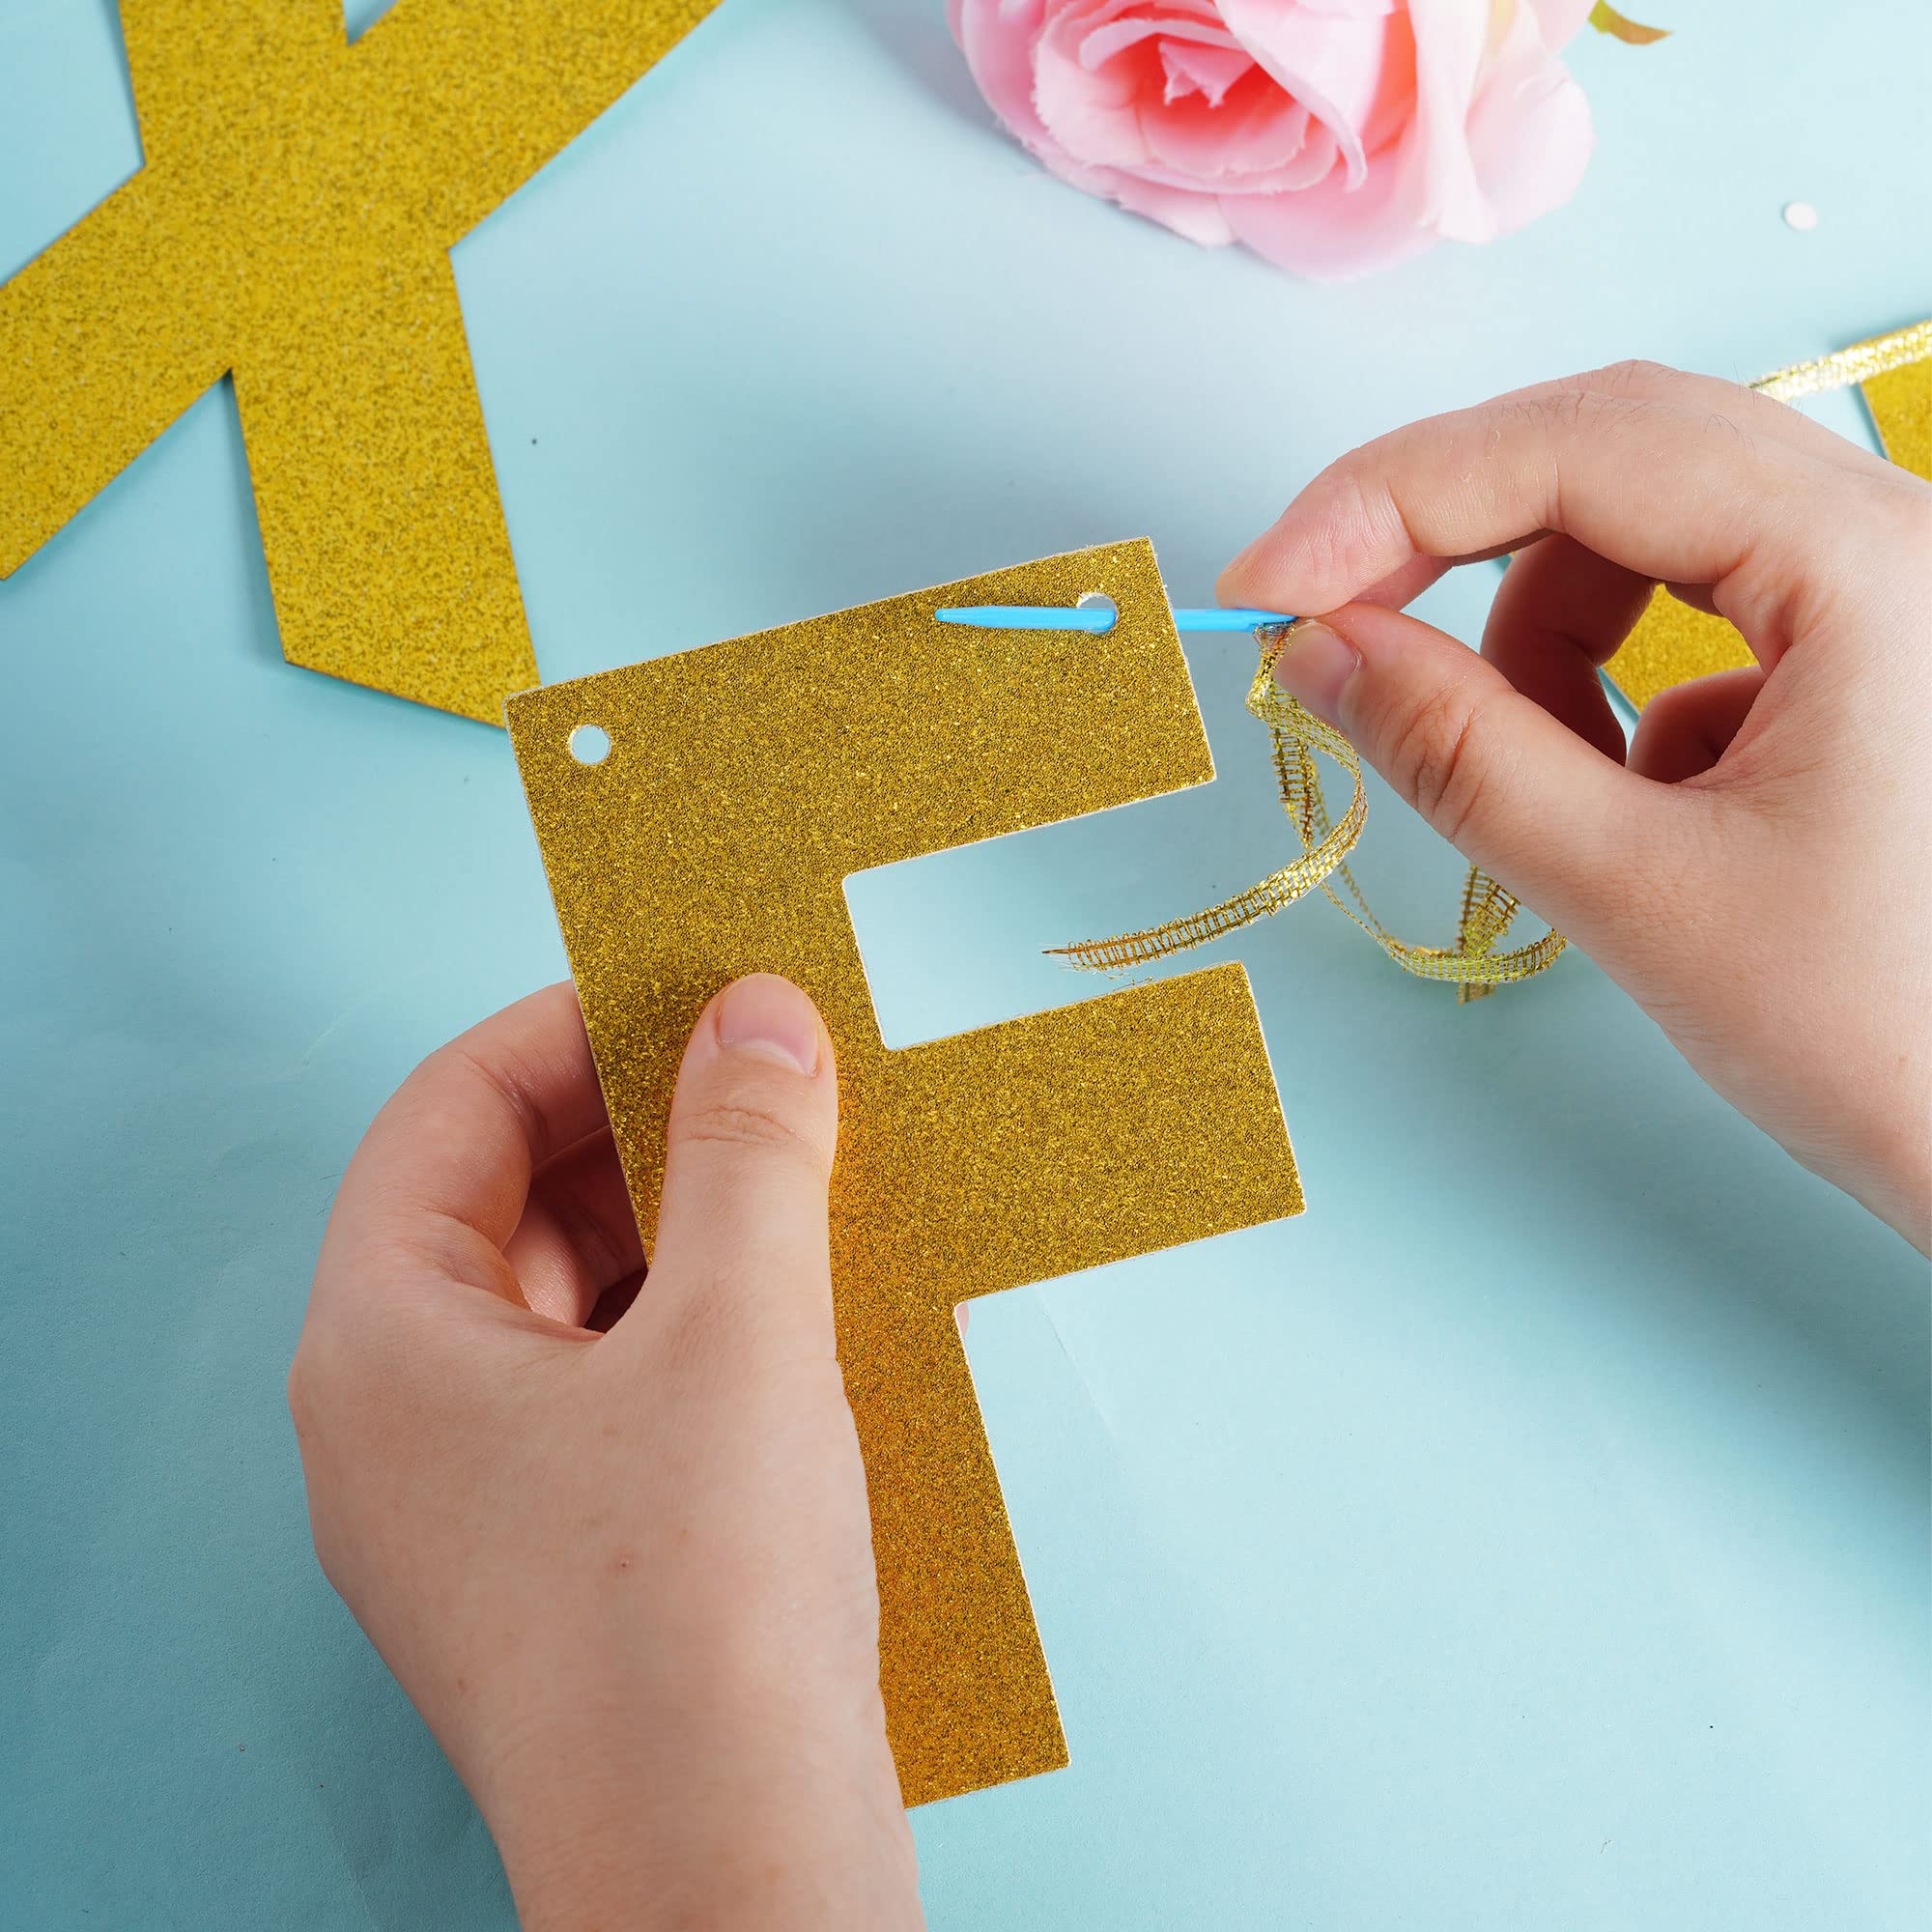 DIY Banner Kit with Letters Glitter Banner Letters Gold Customizable Birthday Banners Graduation Banner Custom Party Hanging Banner for Graduation Wedding Party Baby Shower Decoration (Gold)